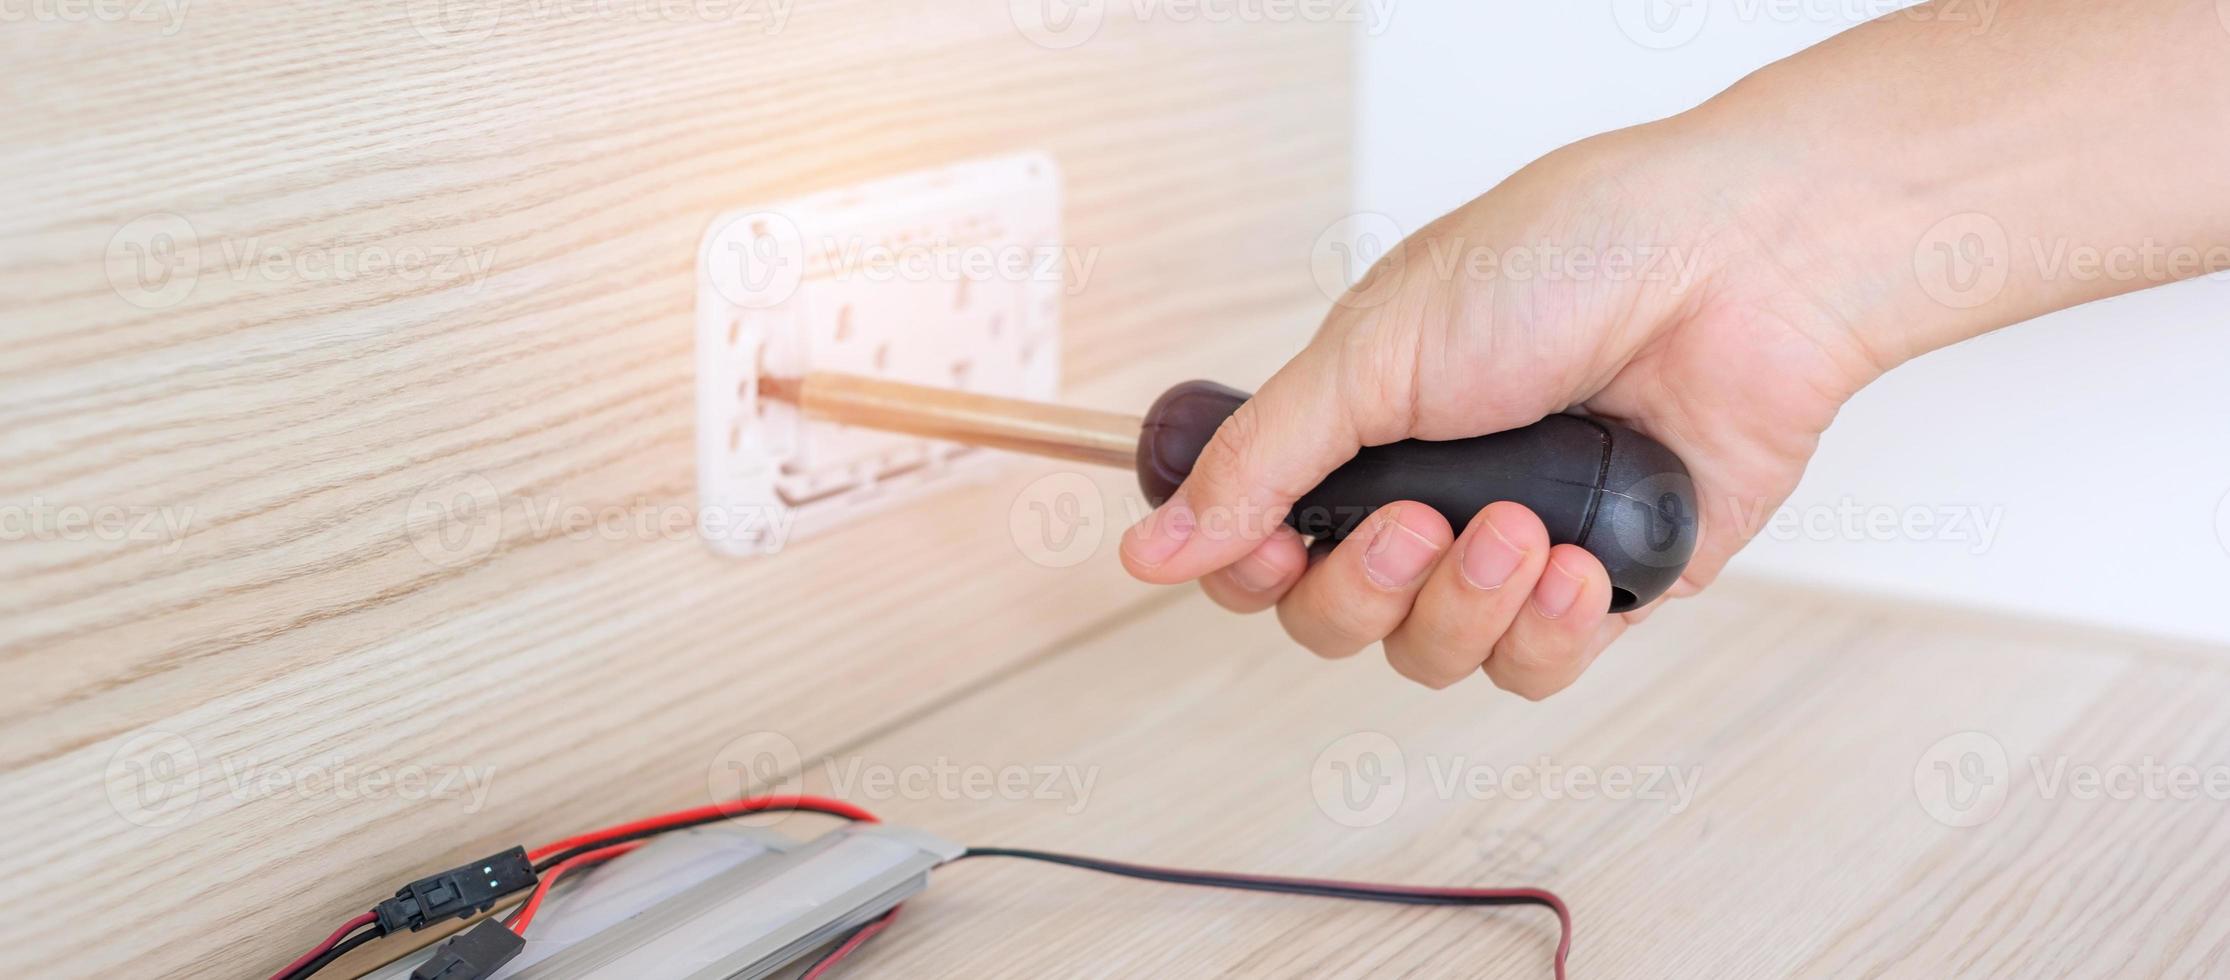 Man hand using screwdriver installing Wire cables for socket plug. Renovation, Repair, fixing and development of home and apartment concepts photo